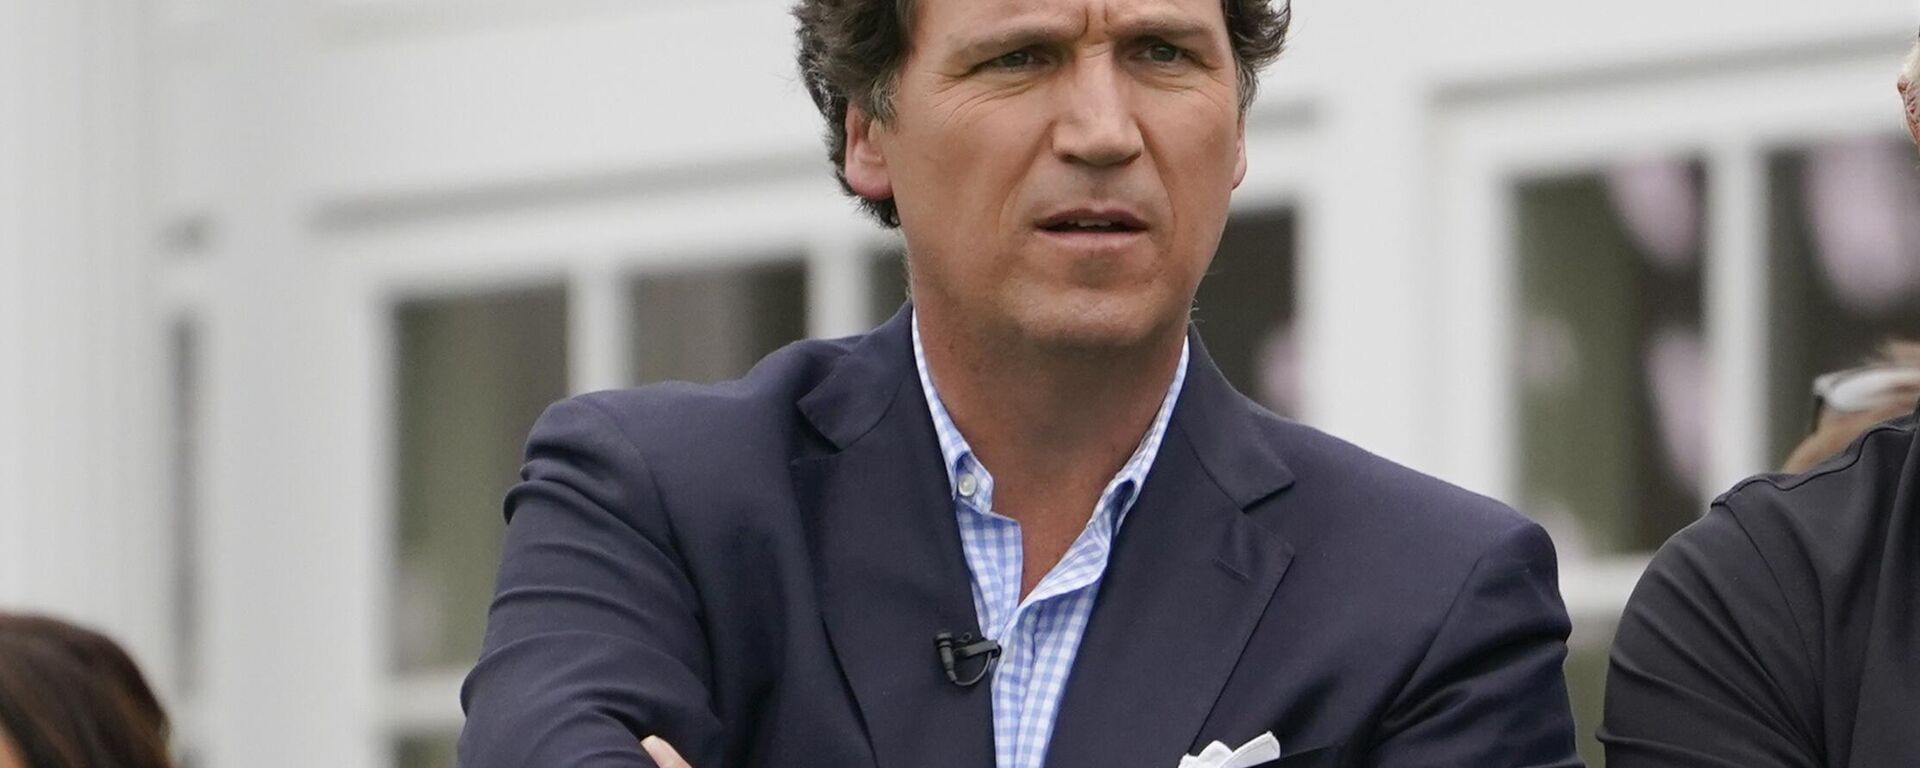 Tucker Carlson attends the final round of the Bedminster Invitational LIV Golf tournament in Bedminster, N.J., Sunday, July 31, 2022. - Sputnik Africa, 1920, 07.06.2023